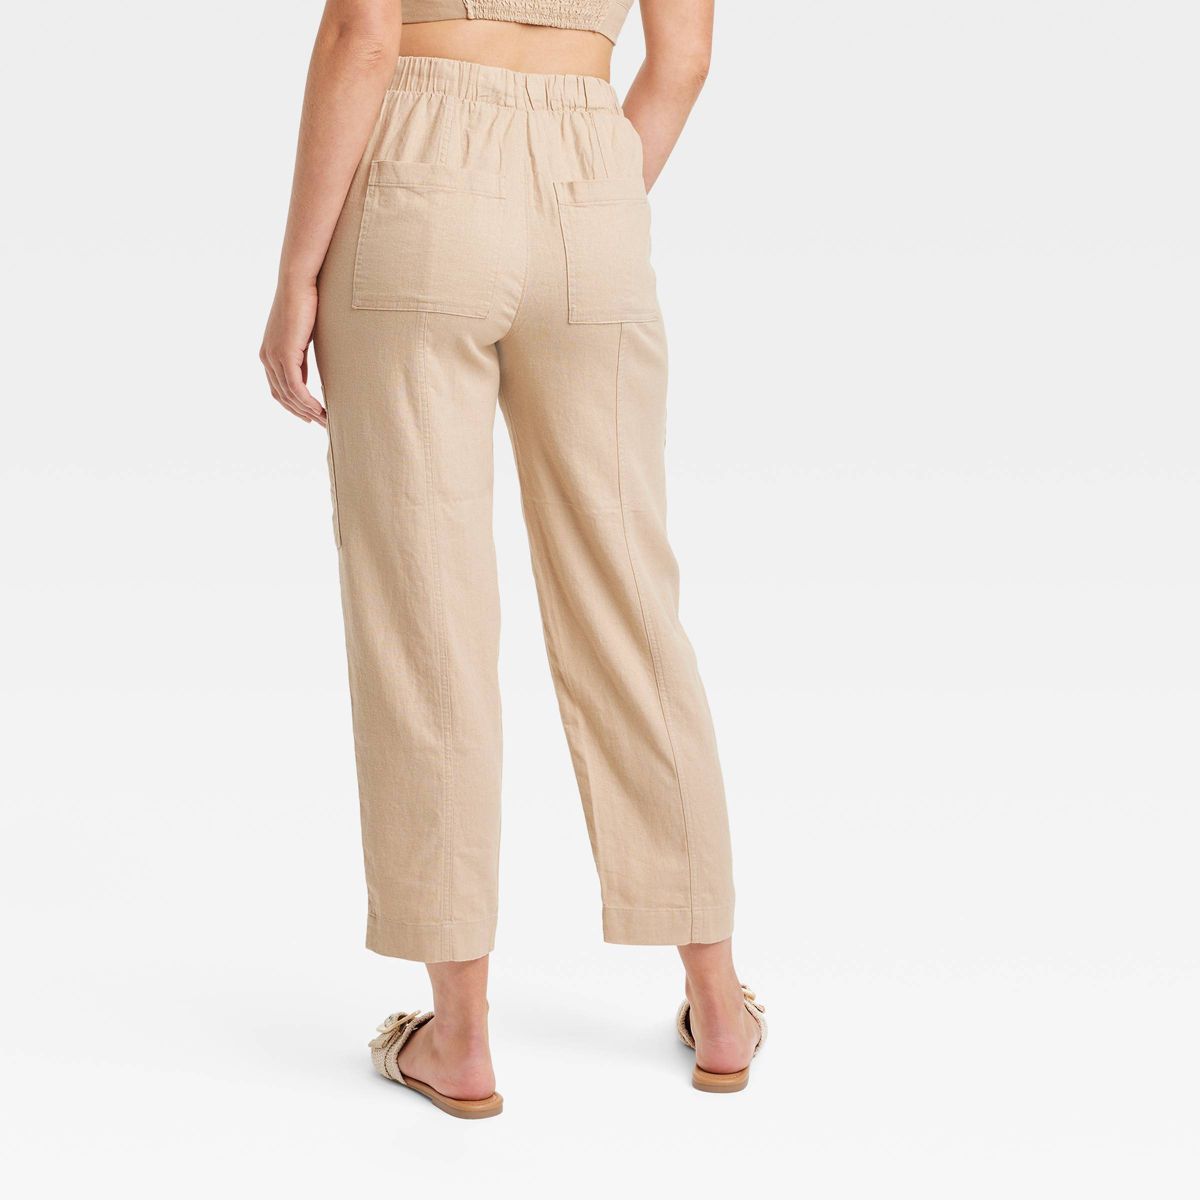 Women's High-Rise Pull-On Tapered Pants - Universal Thread™ White S | Target